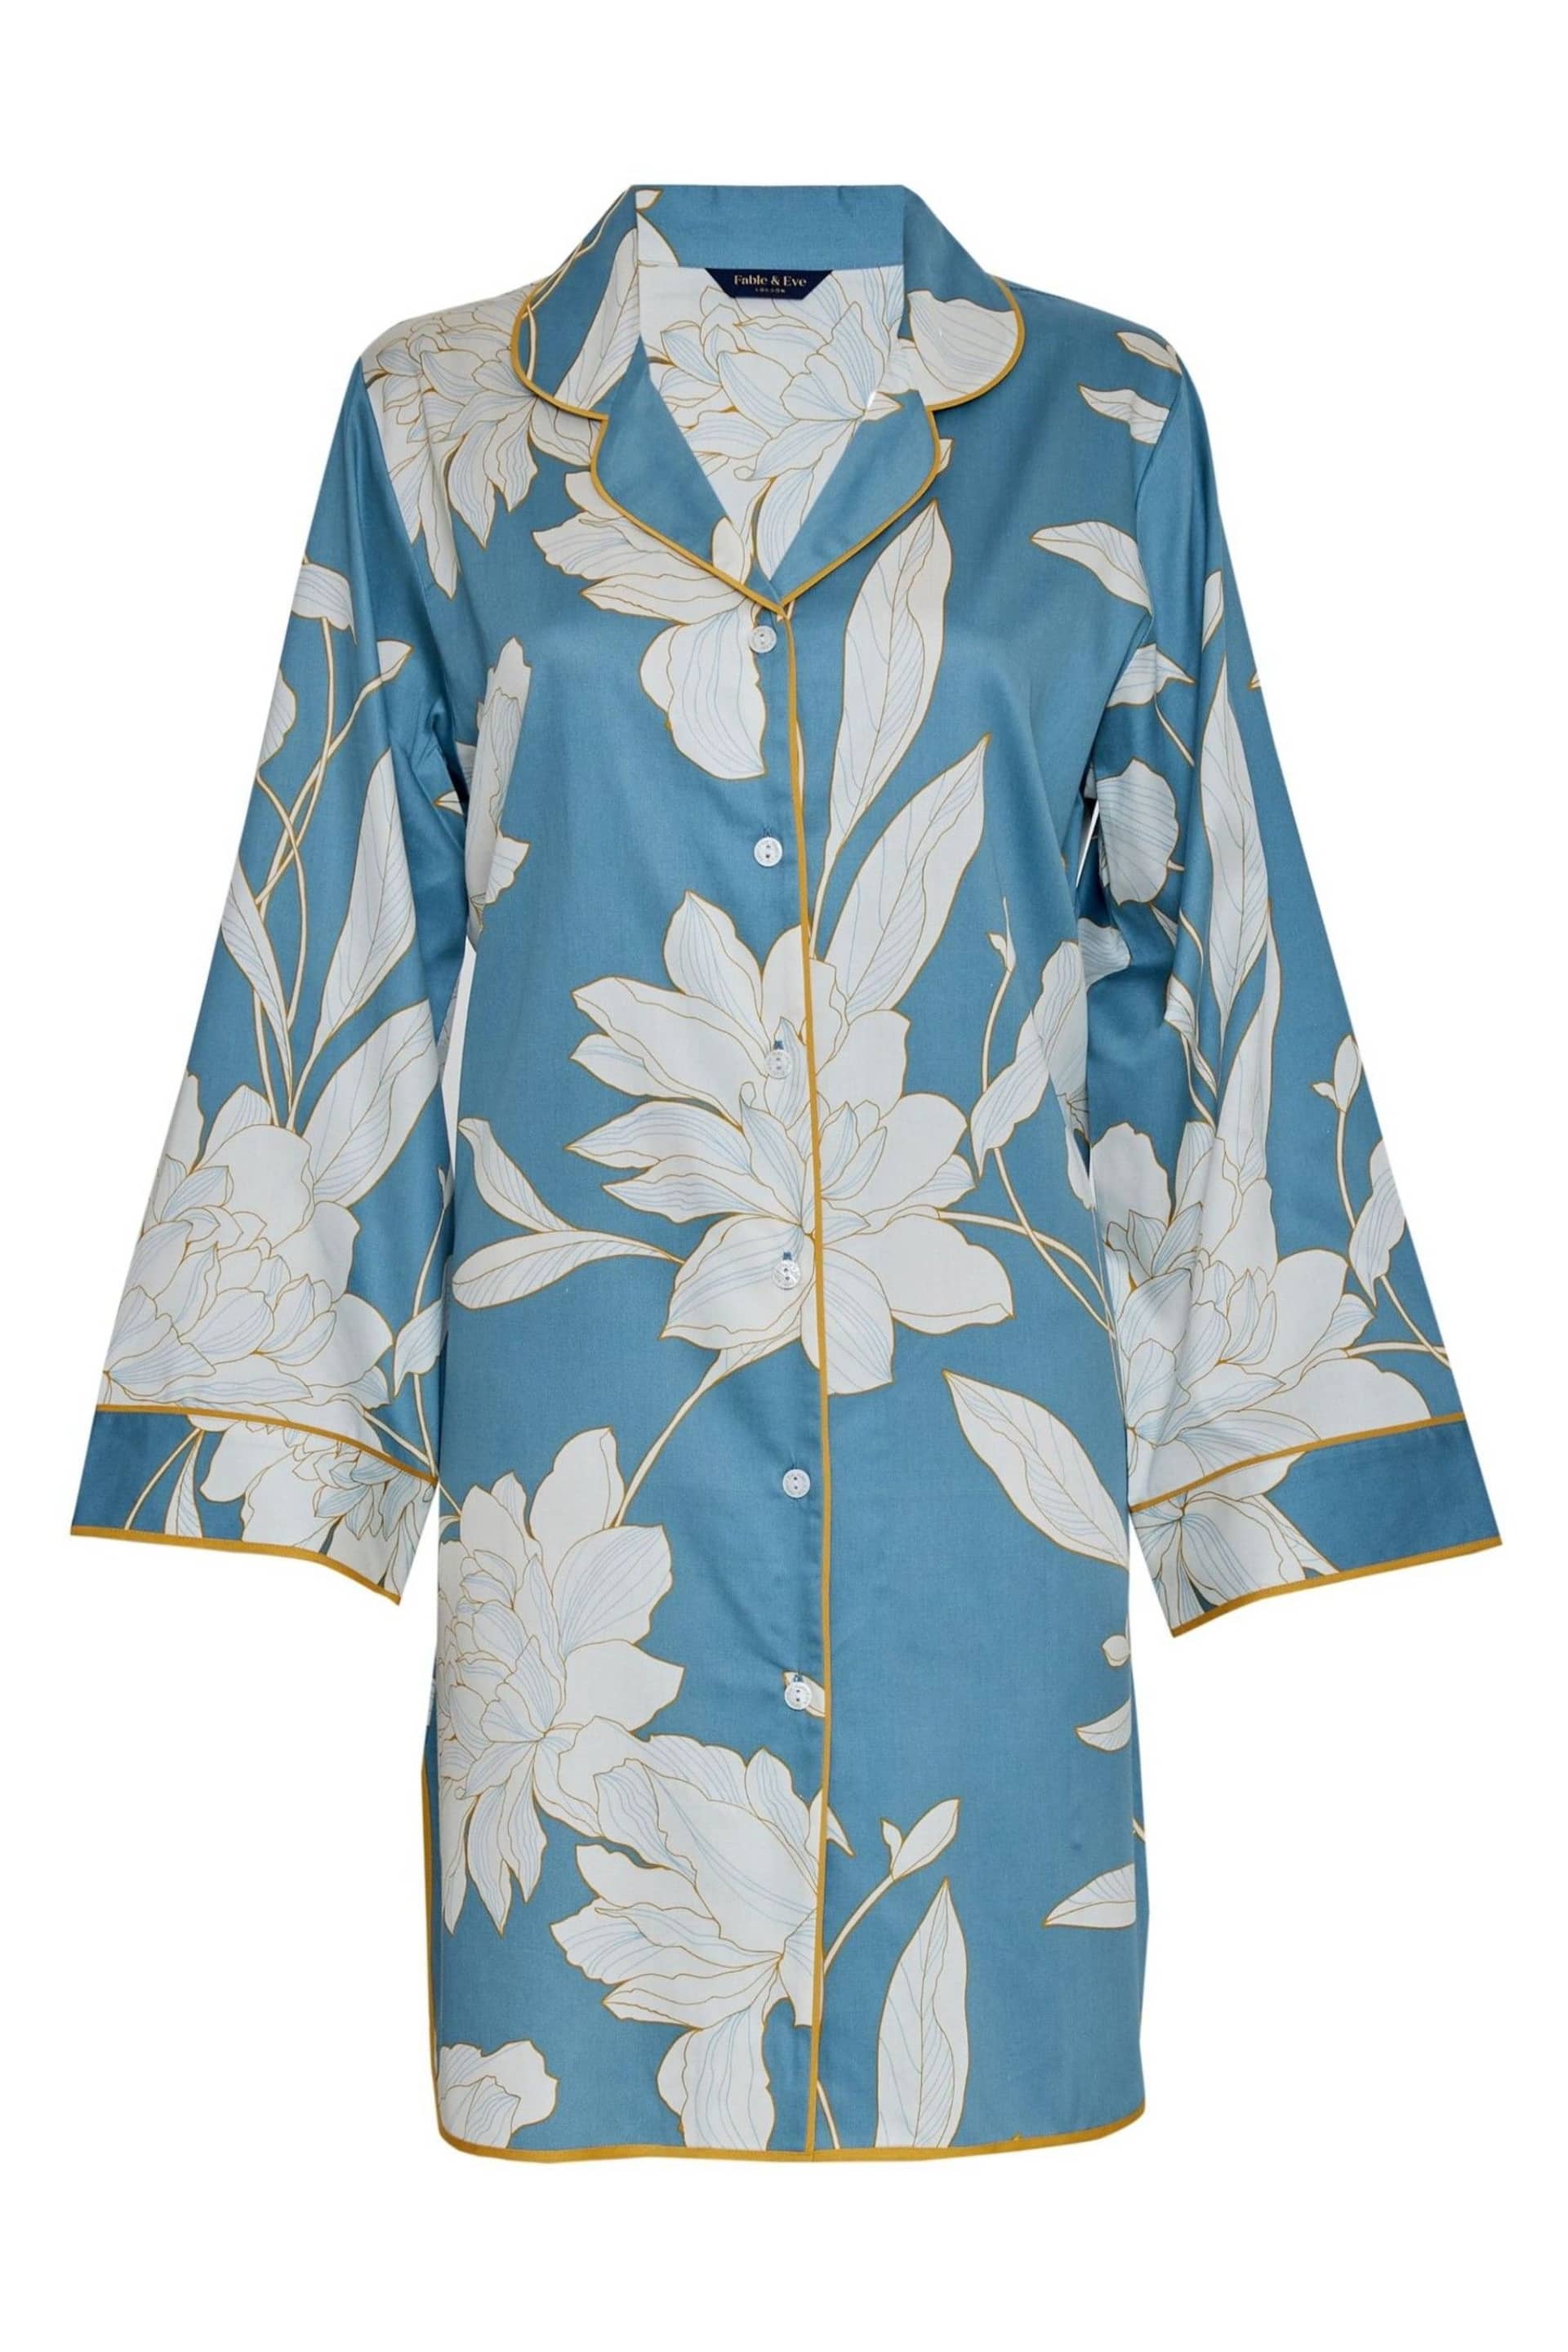 Fable and Eve Blue Floral Print Long Sleeve Nightshirt - Image 4 of 4